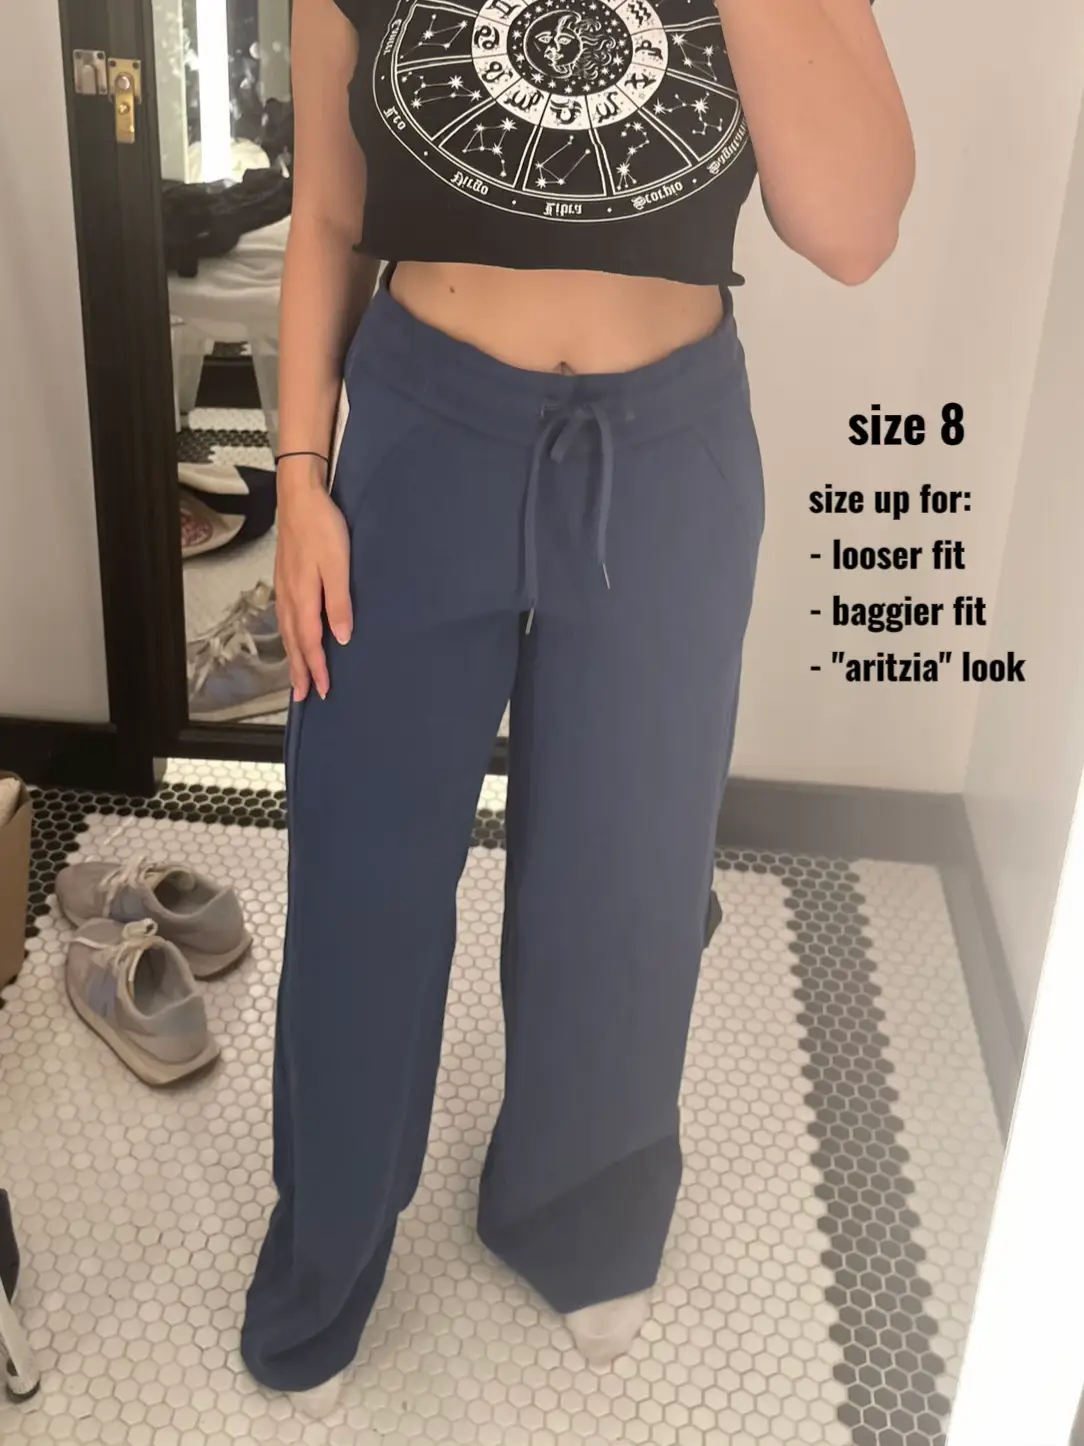 Do you follow the lululemon size chart for your usual size in bottoms? : r/ lululemon